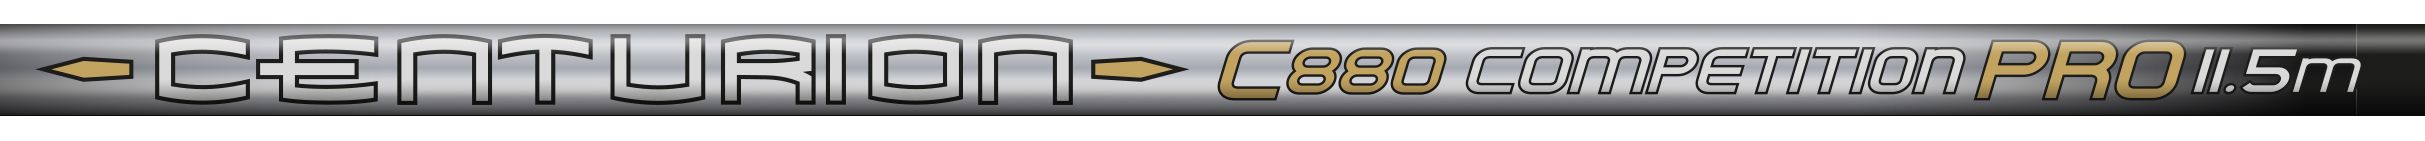 Cresta Pack Centurion C880 Competition Fixed Rod 11.5m